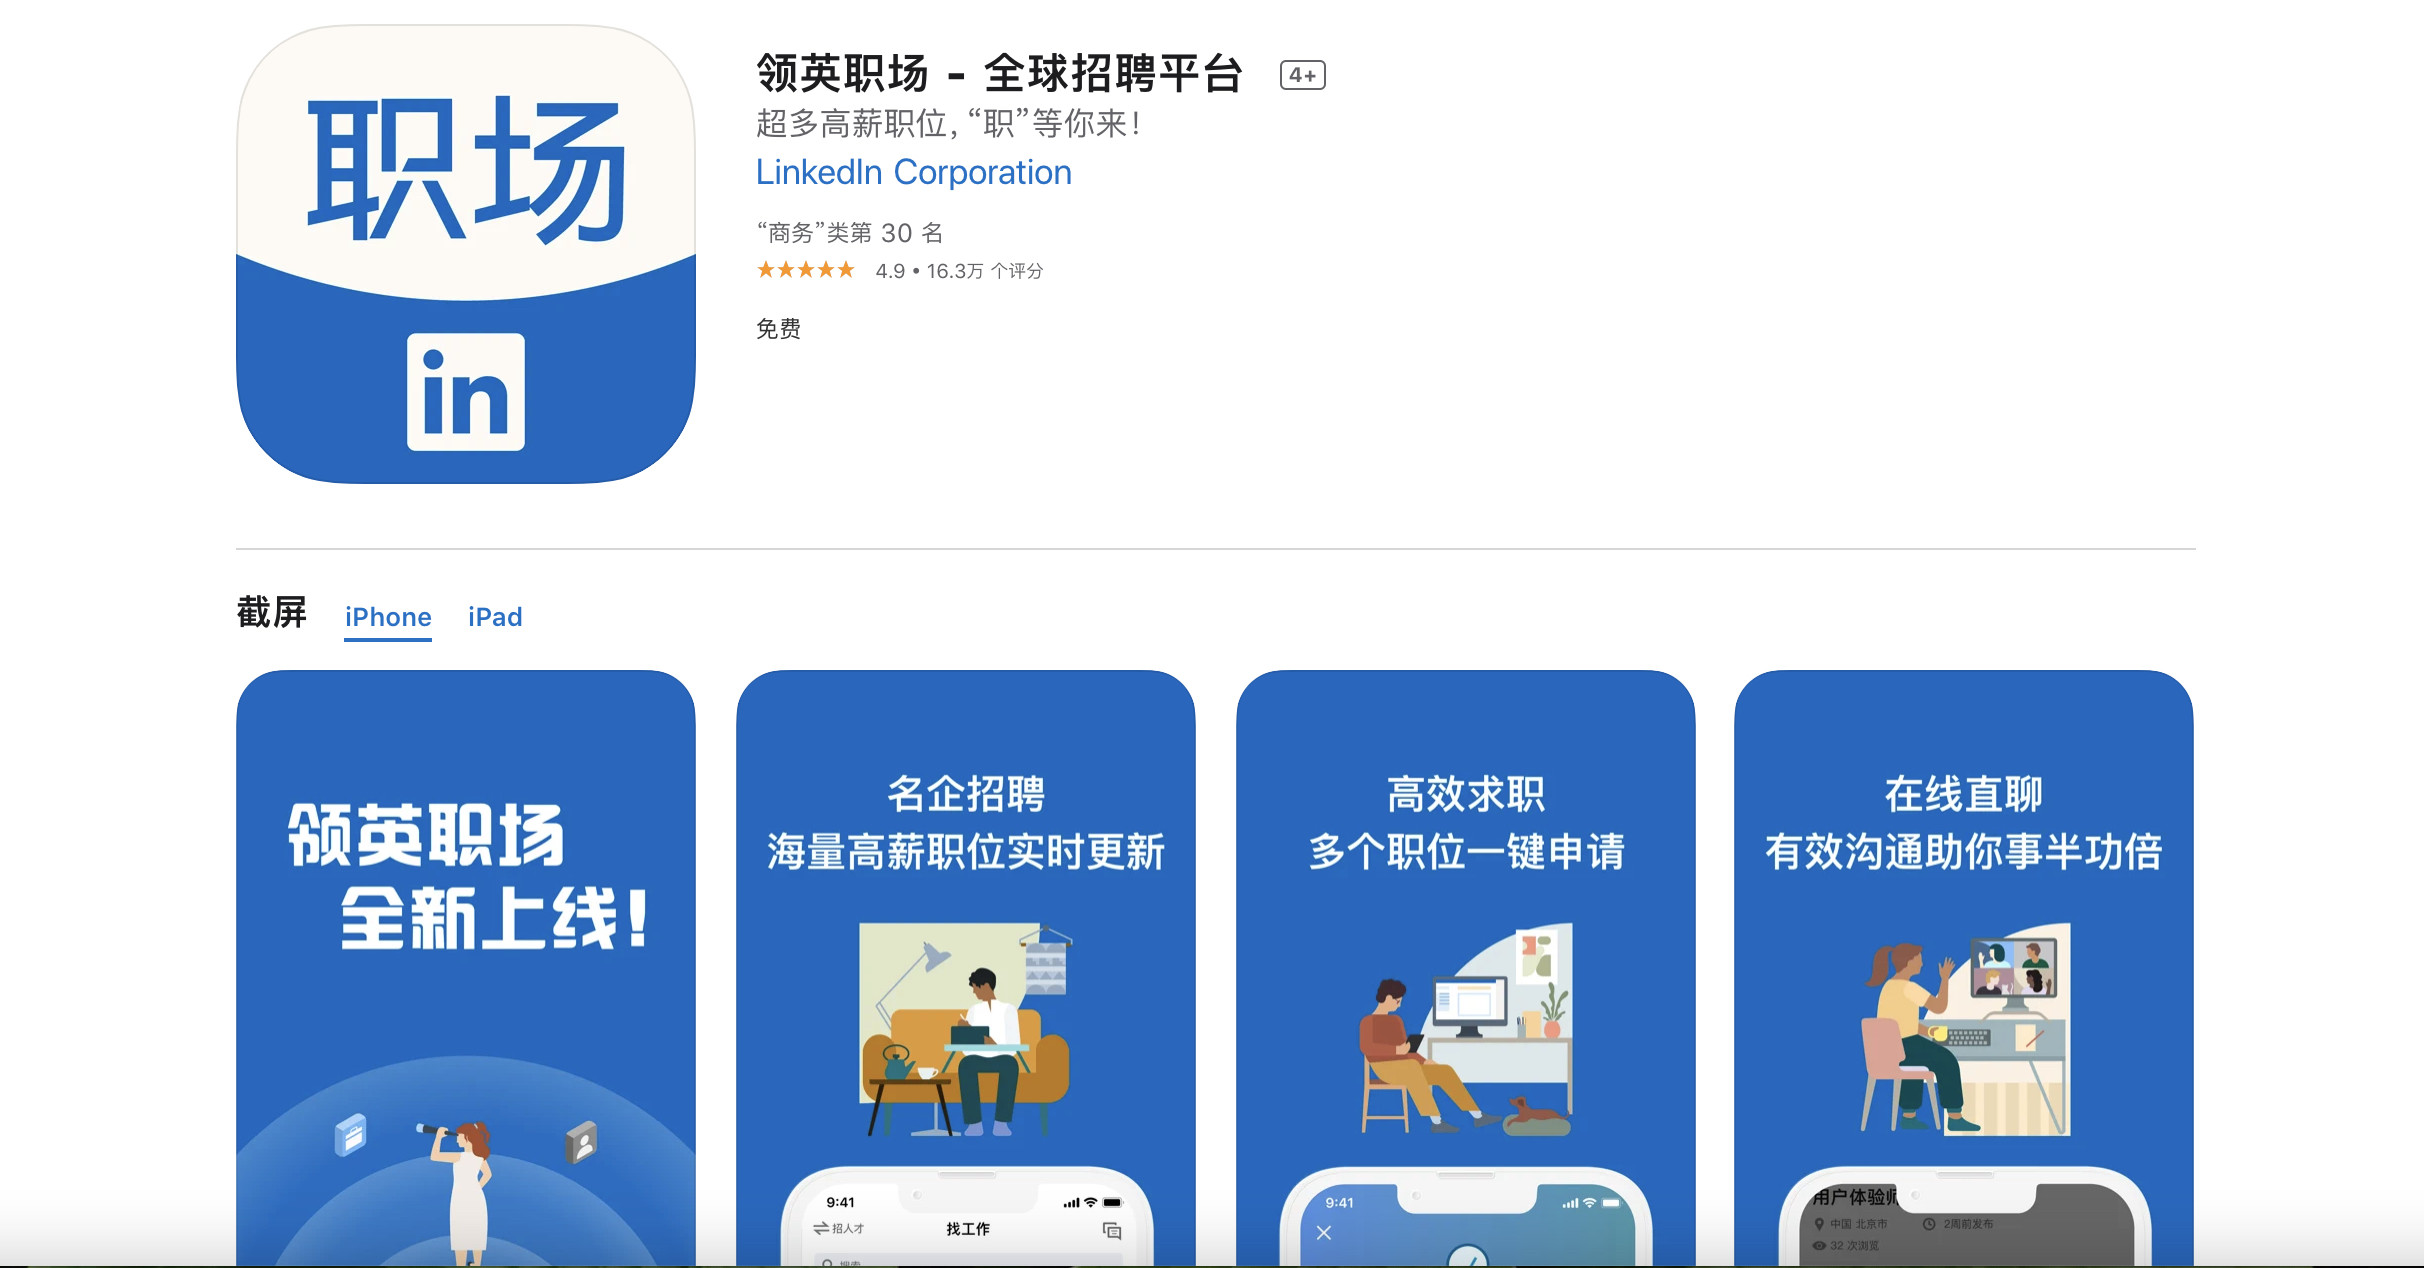 InCareer is a new app from LinkedIn, created specifically for mainland Chinese users. Photo: iOS App Store